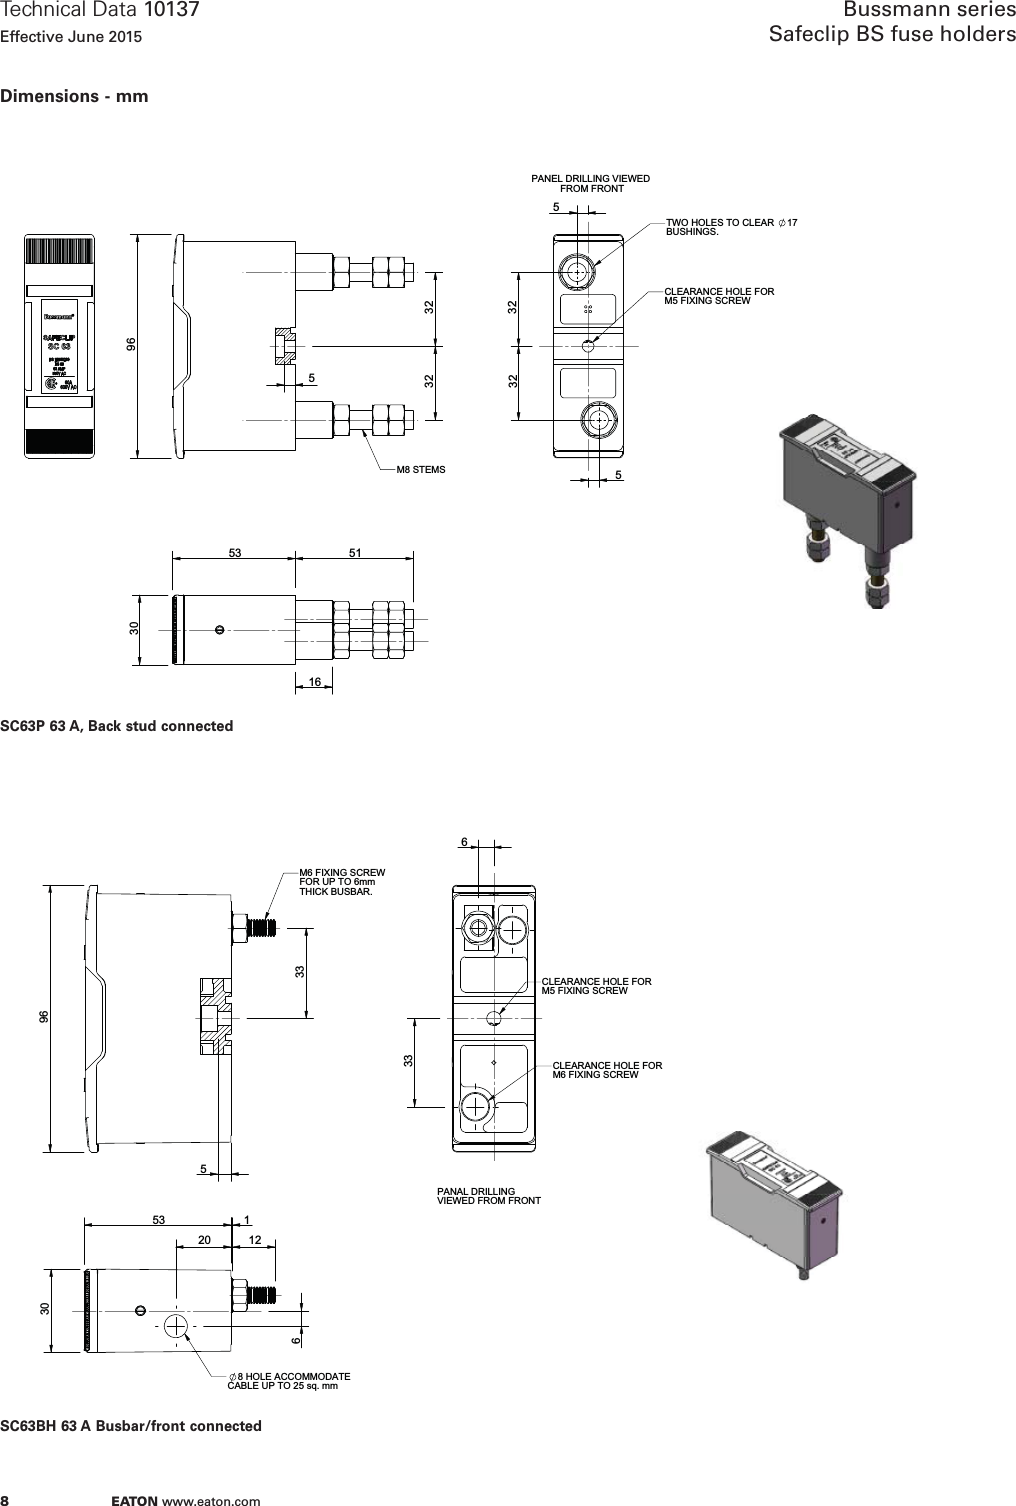 Page 8 of 10 - Bus-iec-ds-10137-safeclipfuseholders  Brochure